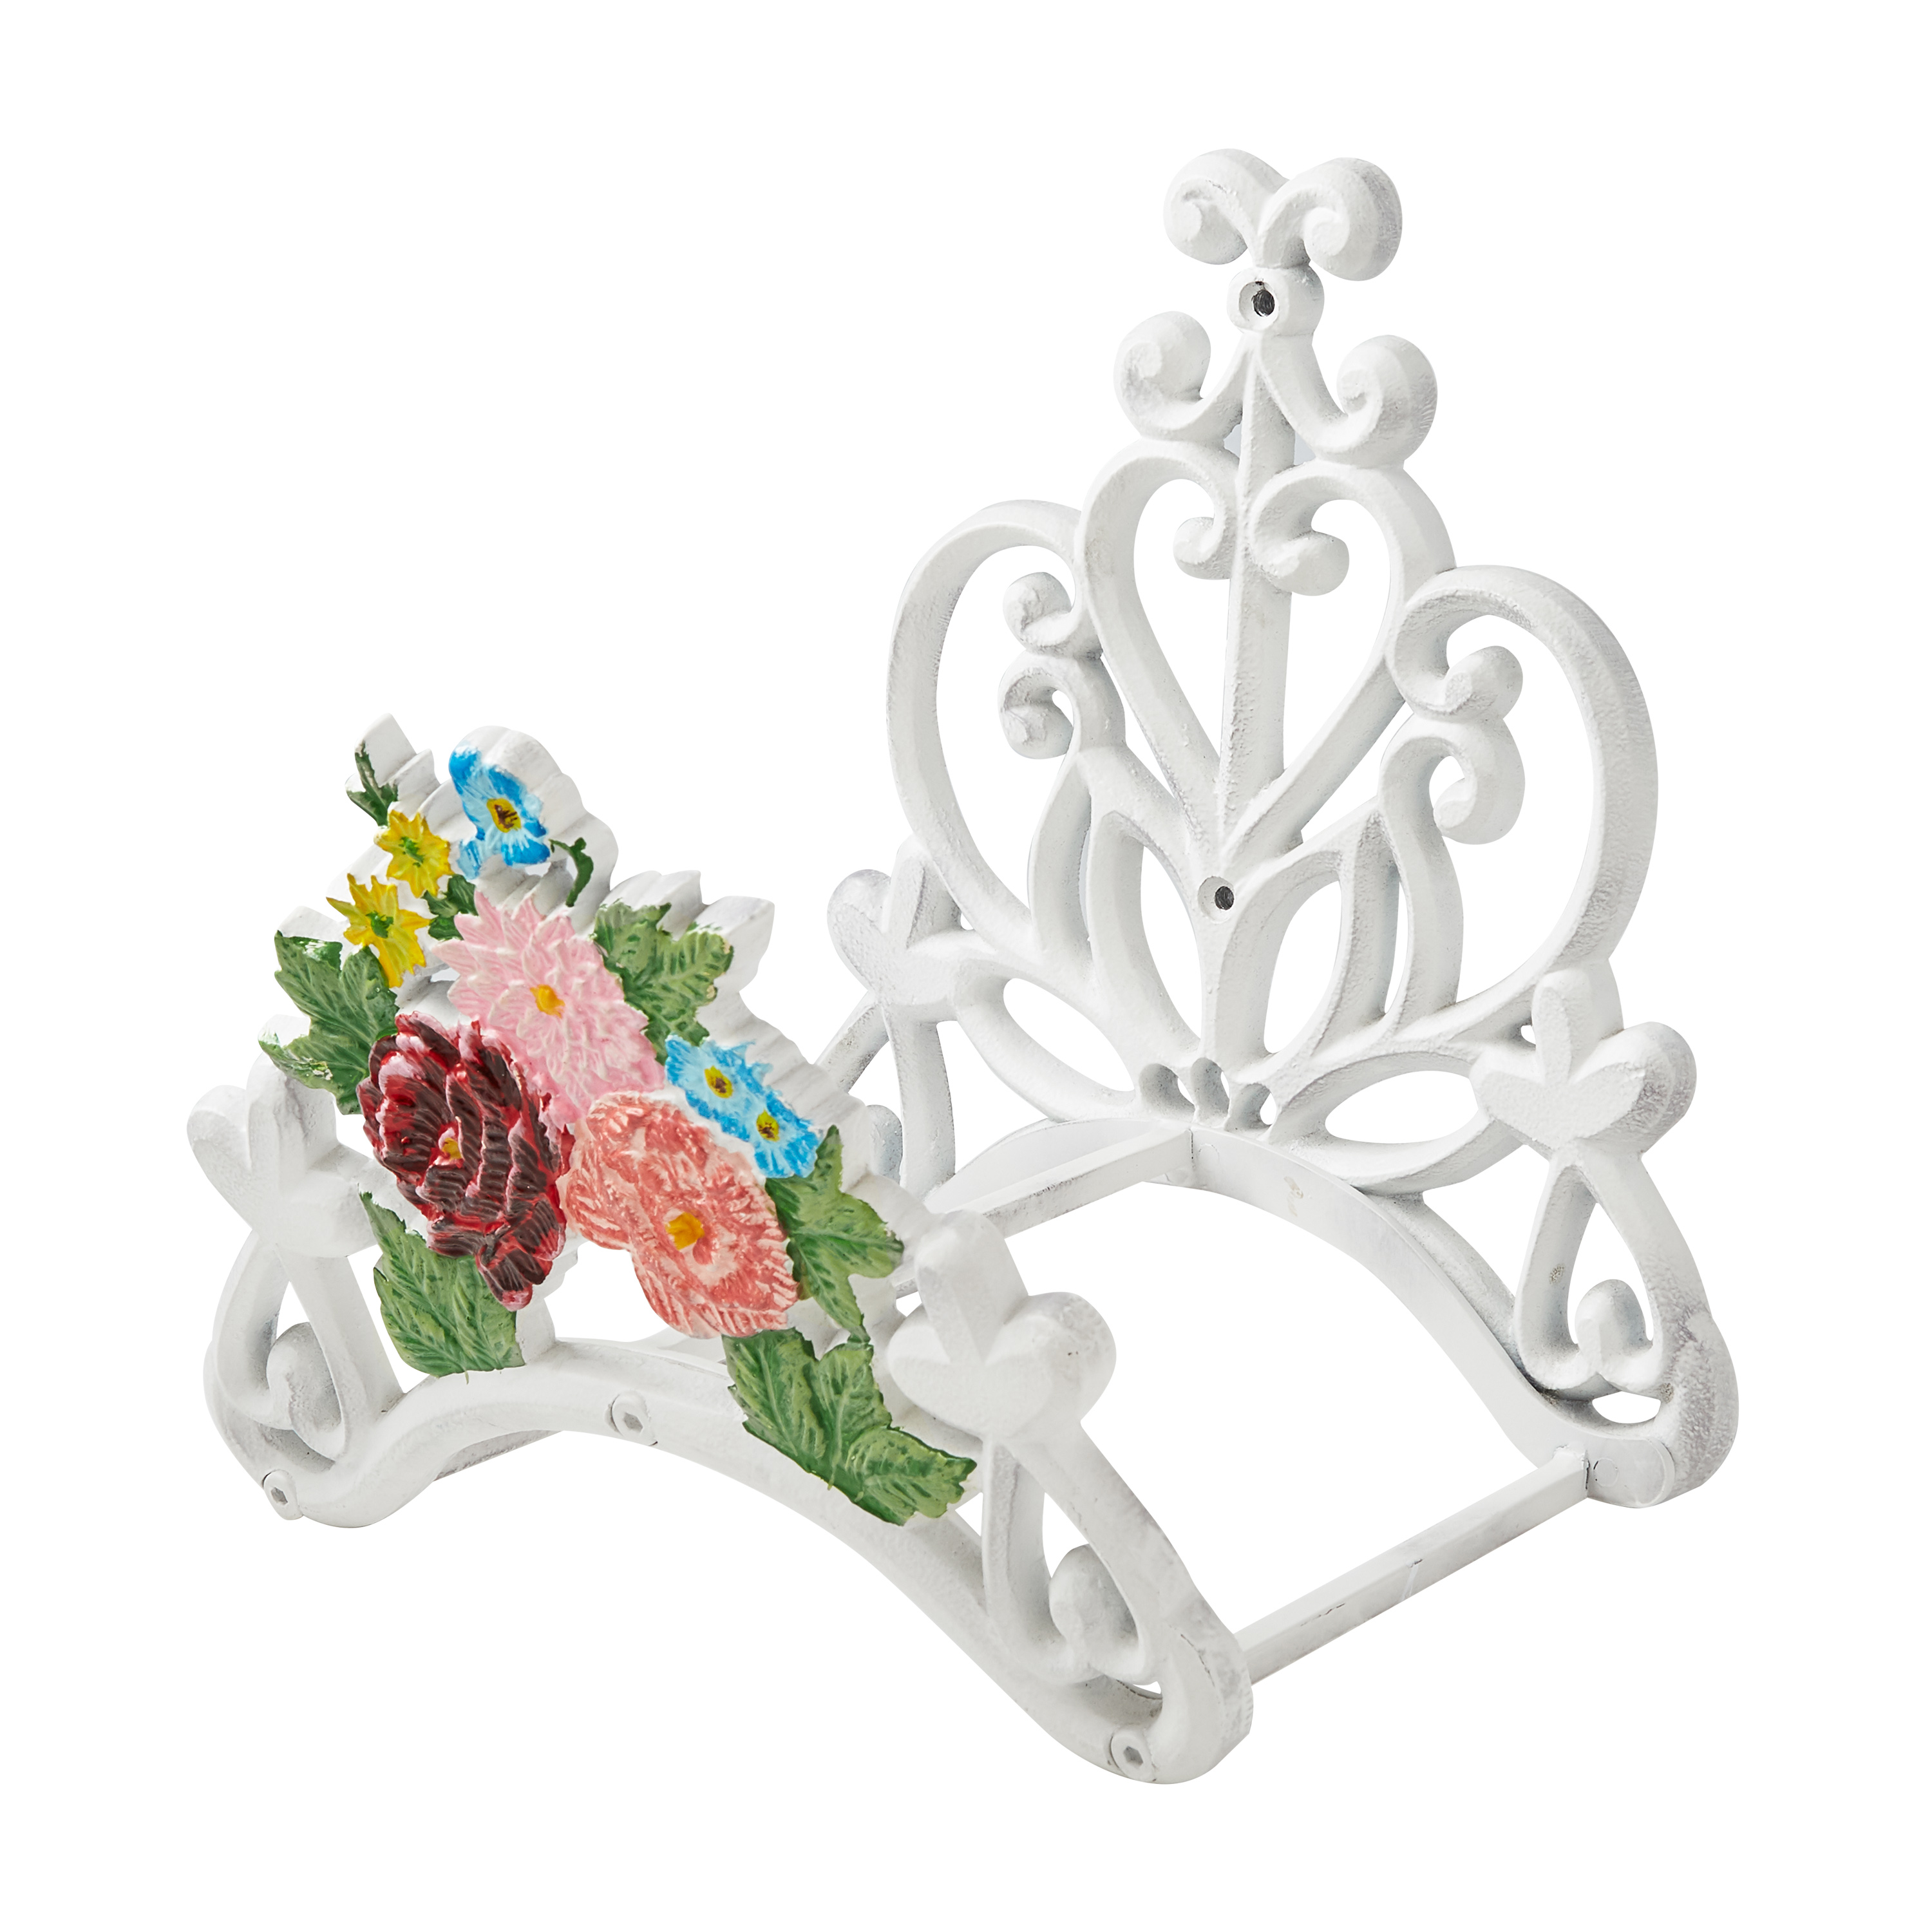 The Pioneer Woman Decorative Metal Floral Hose Hanger, White - image 3 of 7